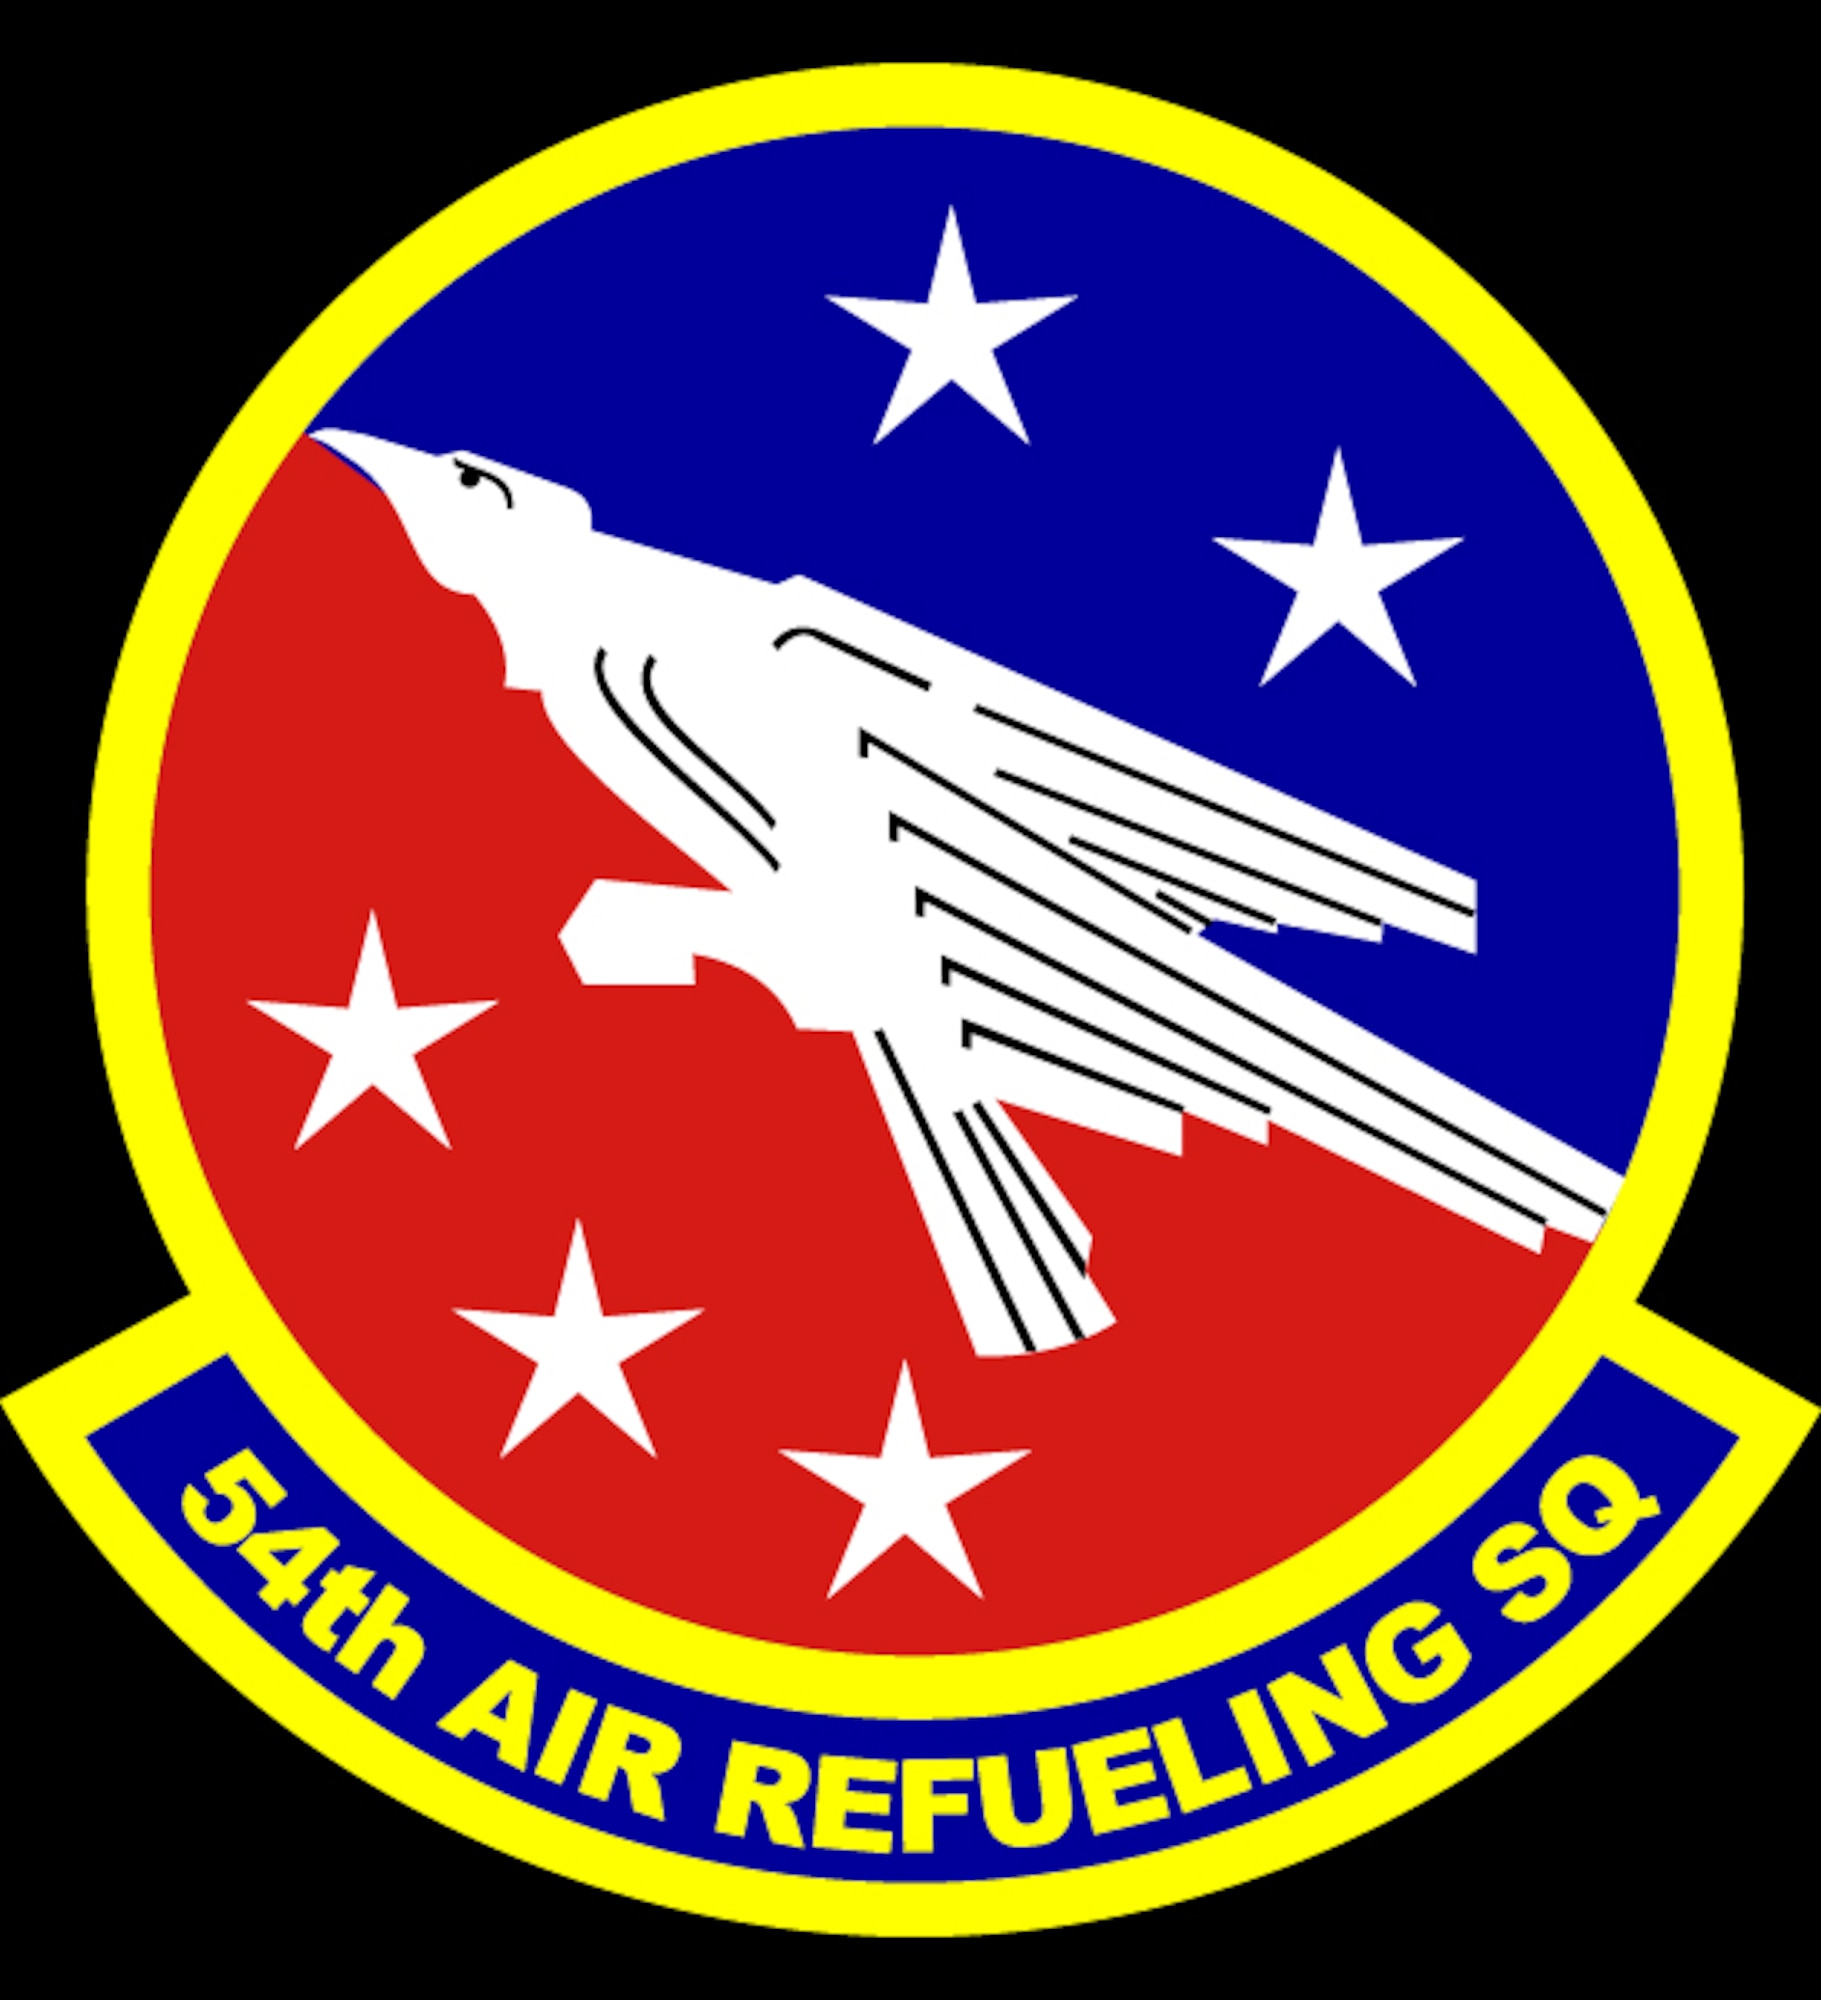 54th Air Refueling Squadron